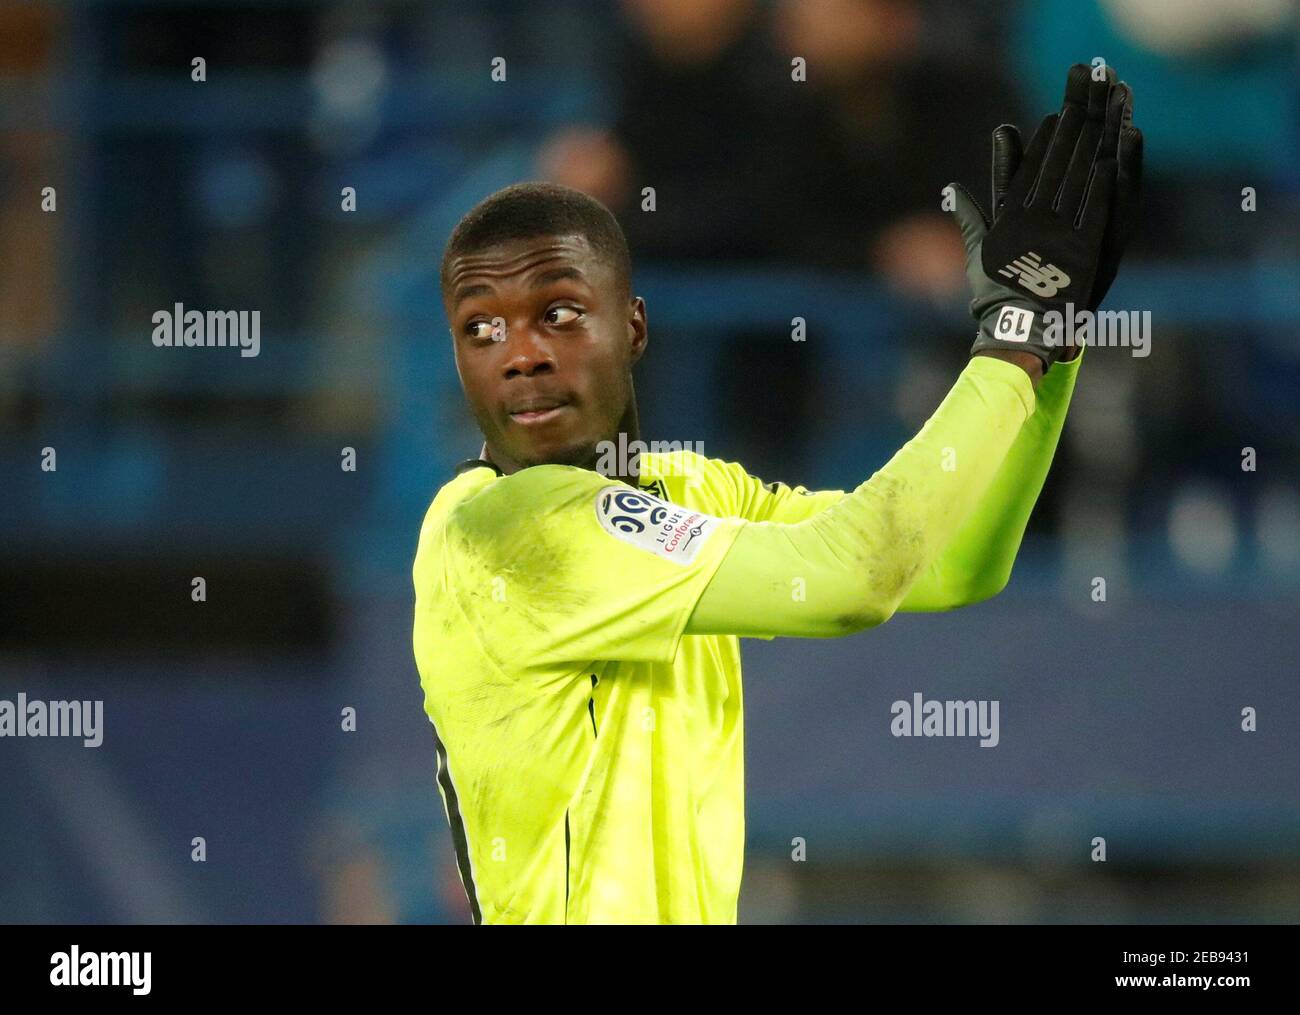 Soccer Football - Ligue 1 - Caen v Lille - Stade Michel d'Ornano, Caen,  France - January 11, 2019 Lille's Nicolas Pepe celebrates after the match  REUTERS/Charles Platiau Stock Photo - Alamy